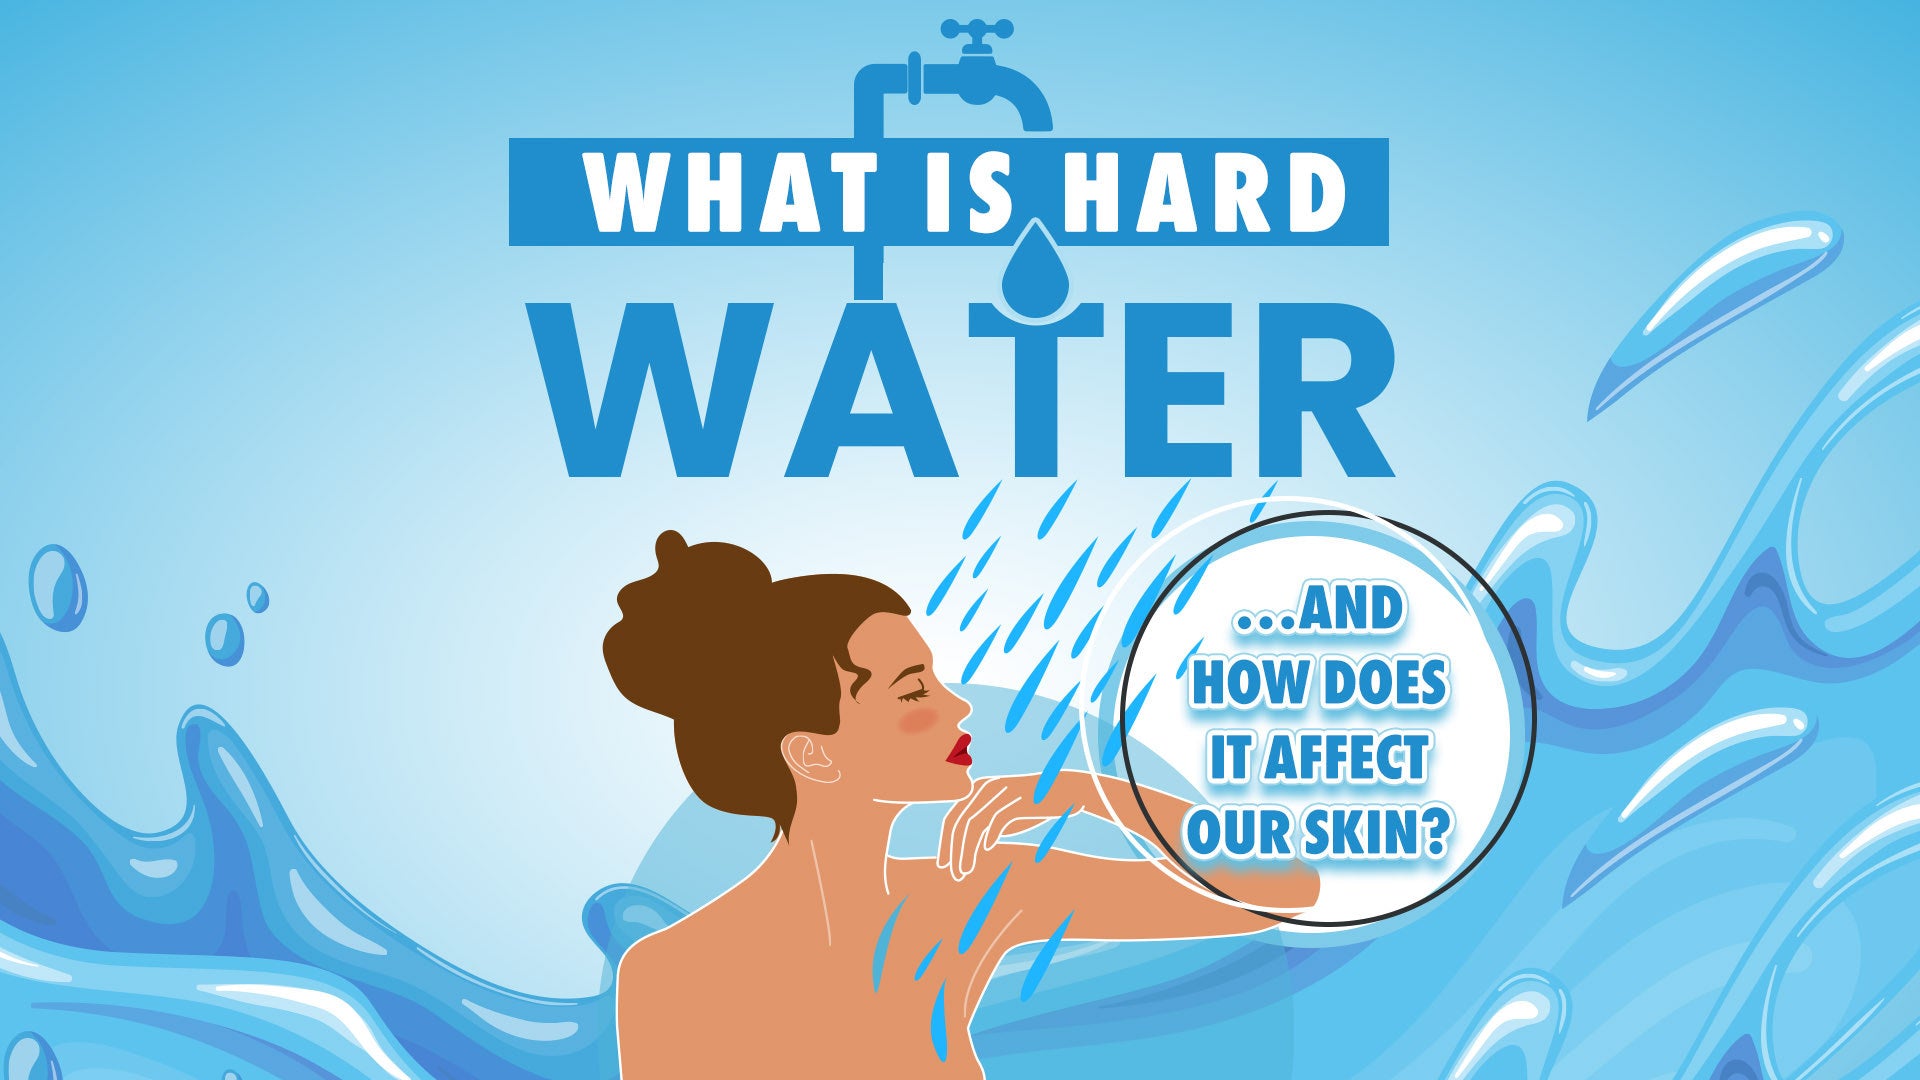 What is hard water?